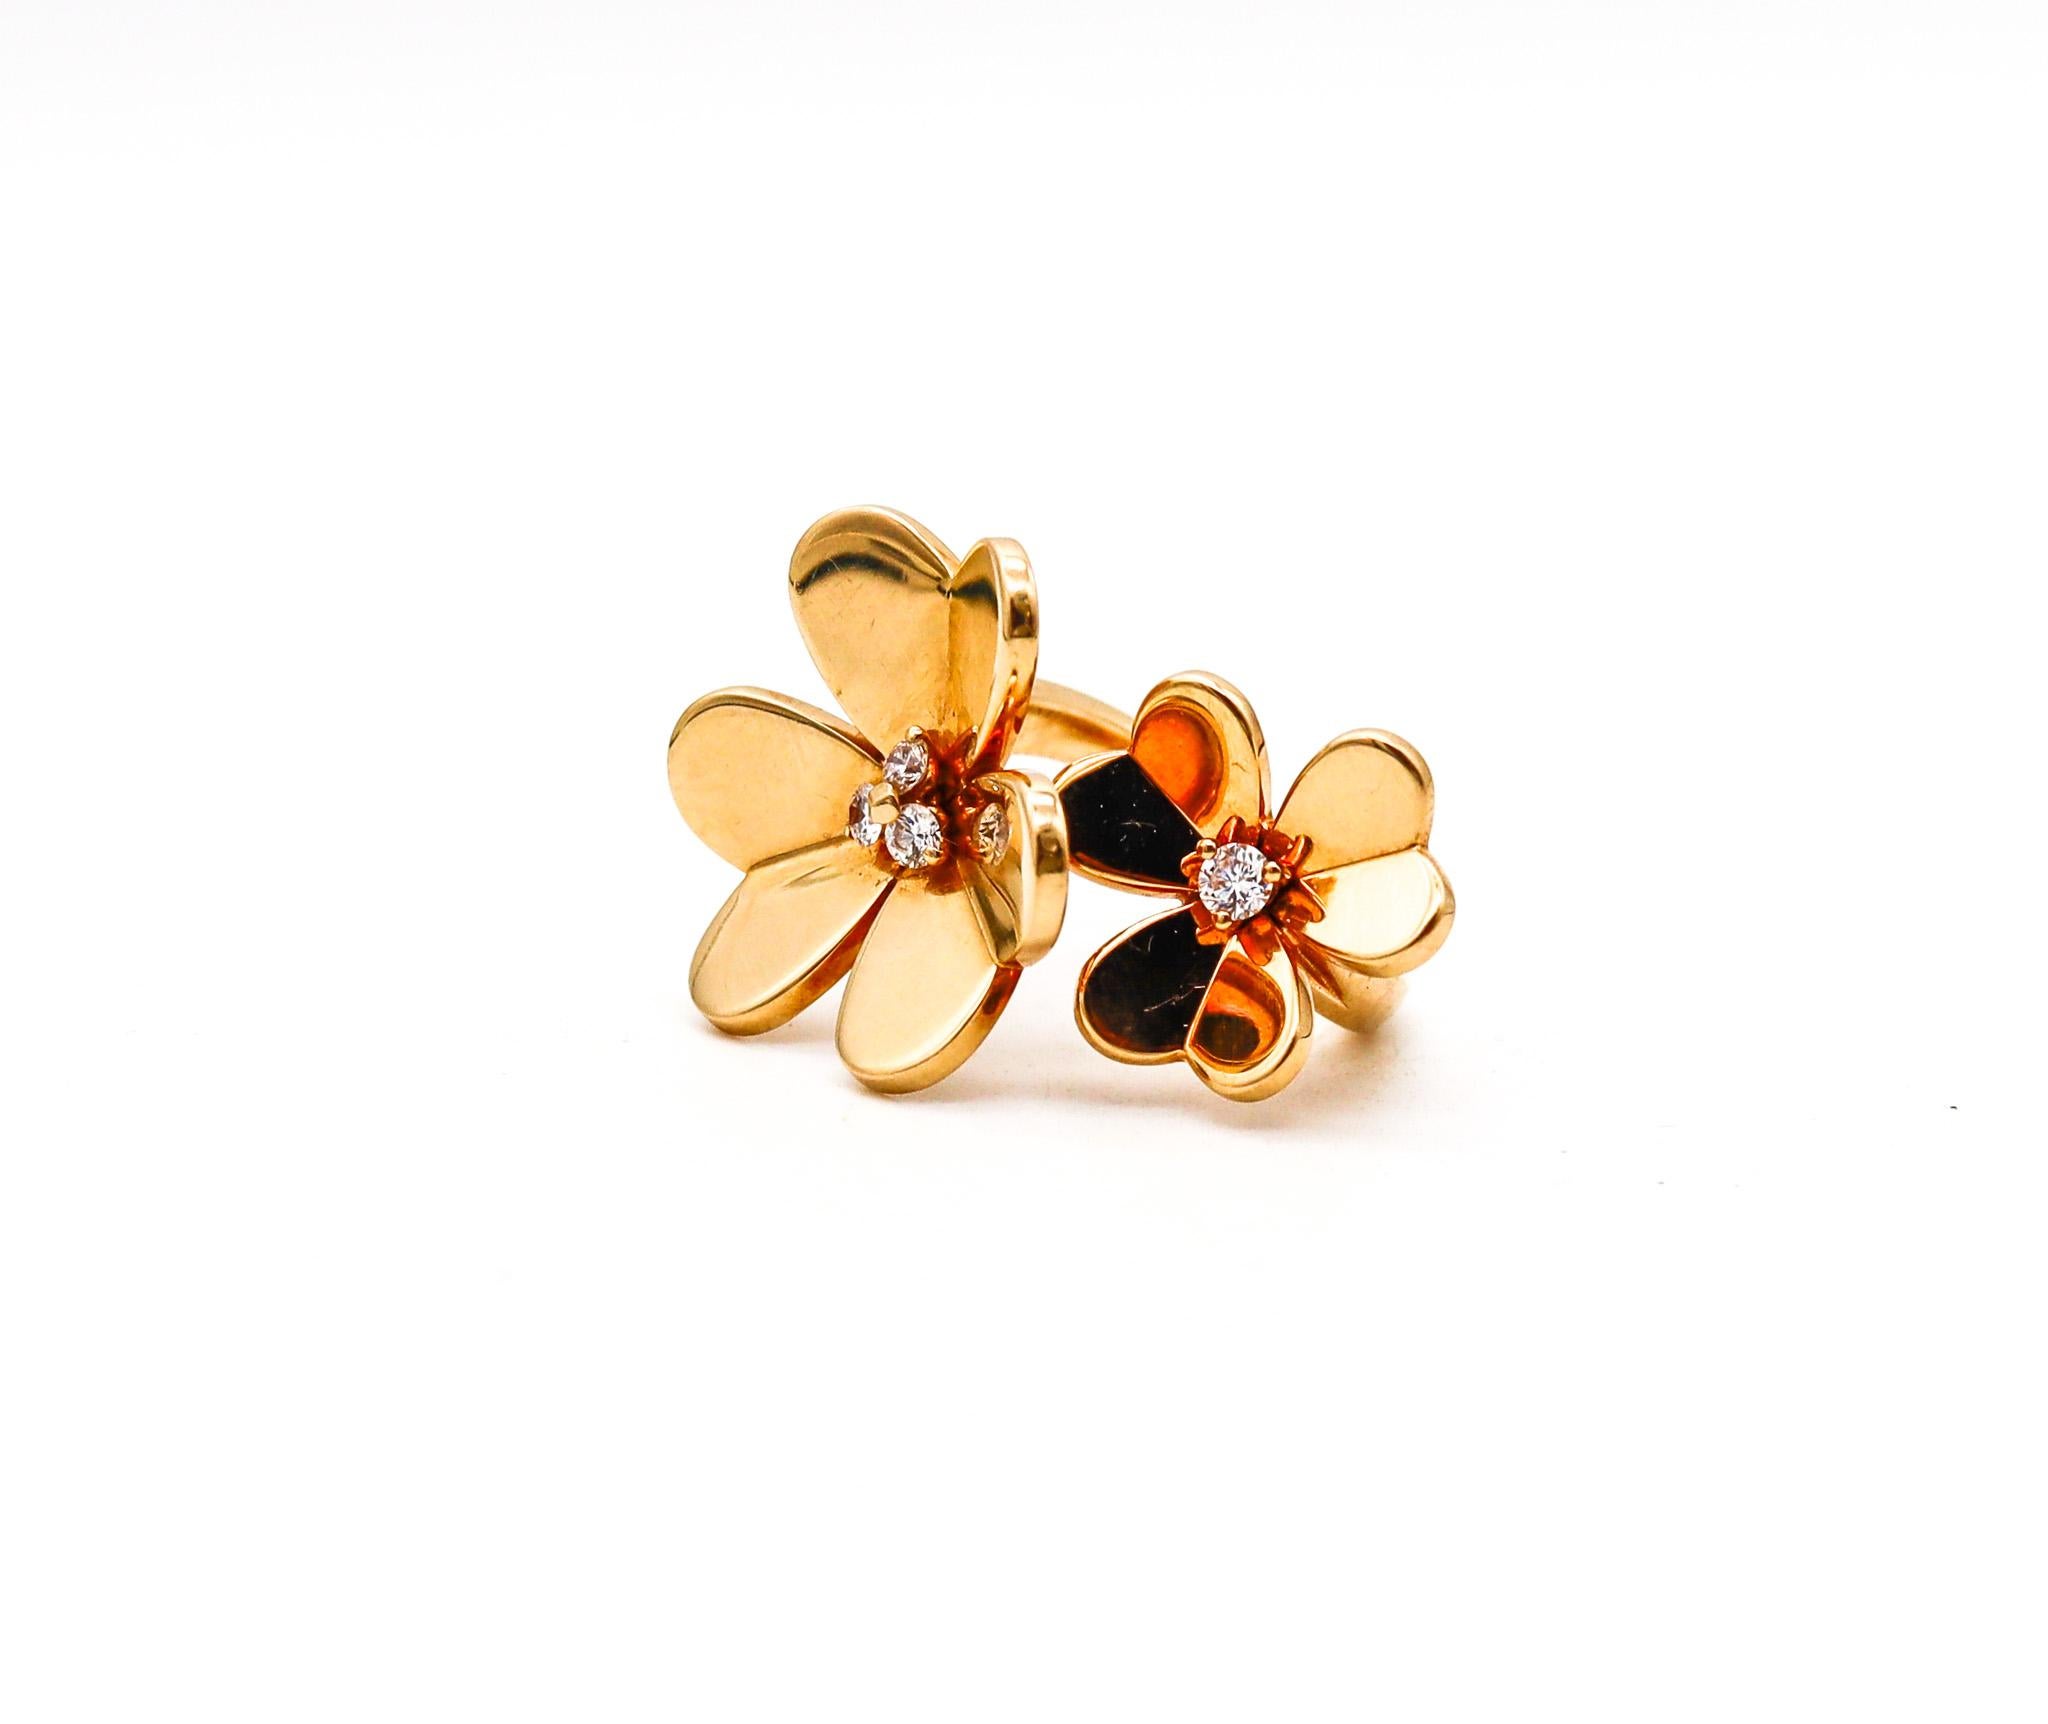 Brilliant Cut Van Cleef & Arpels Frivole Double Flowers Ring In 18Kt Yellow Gold With Diamonds